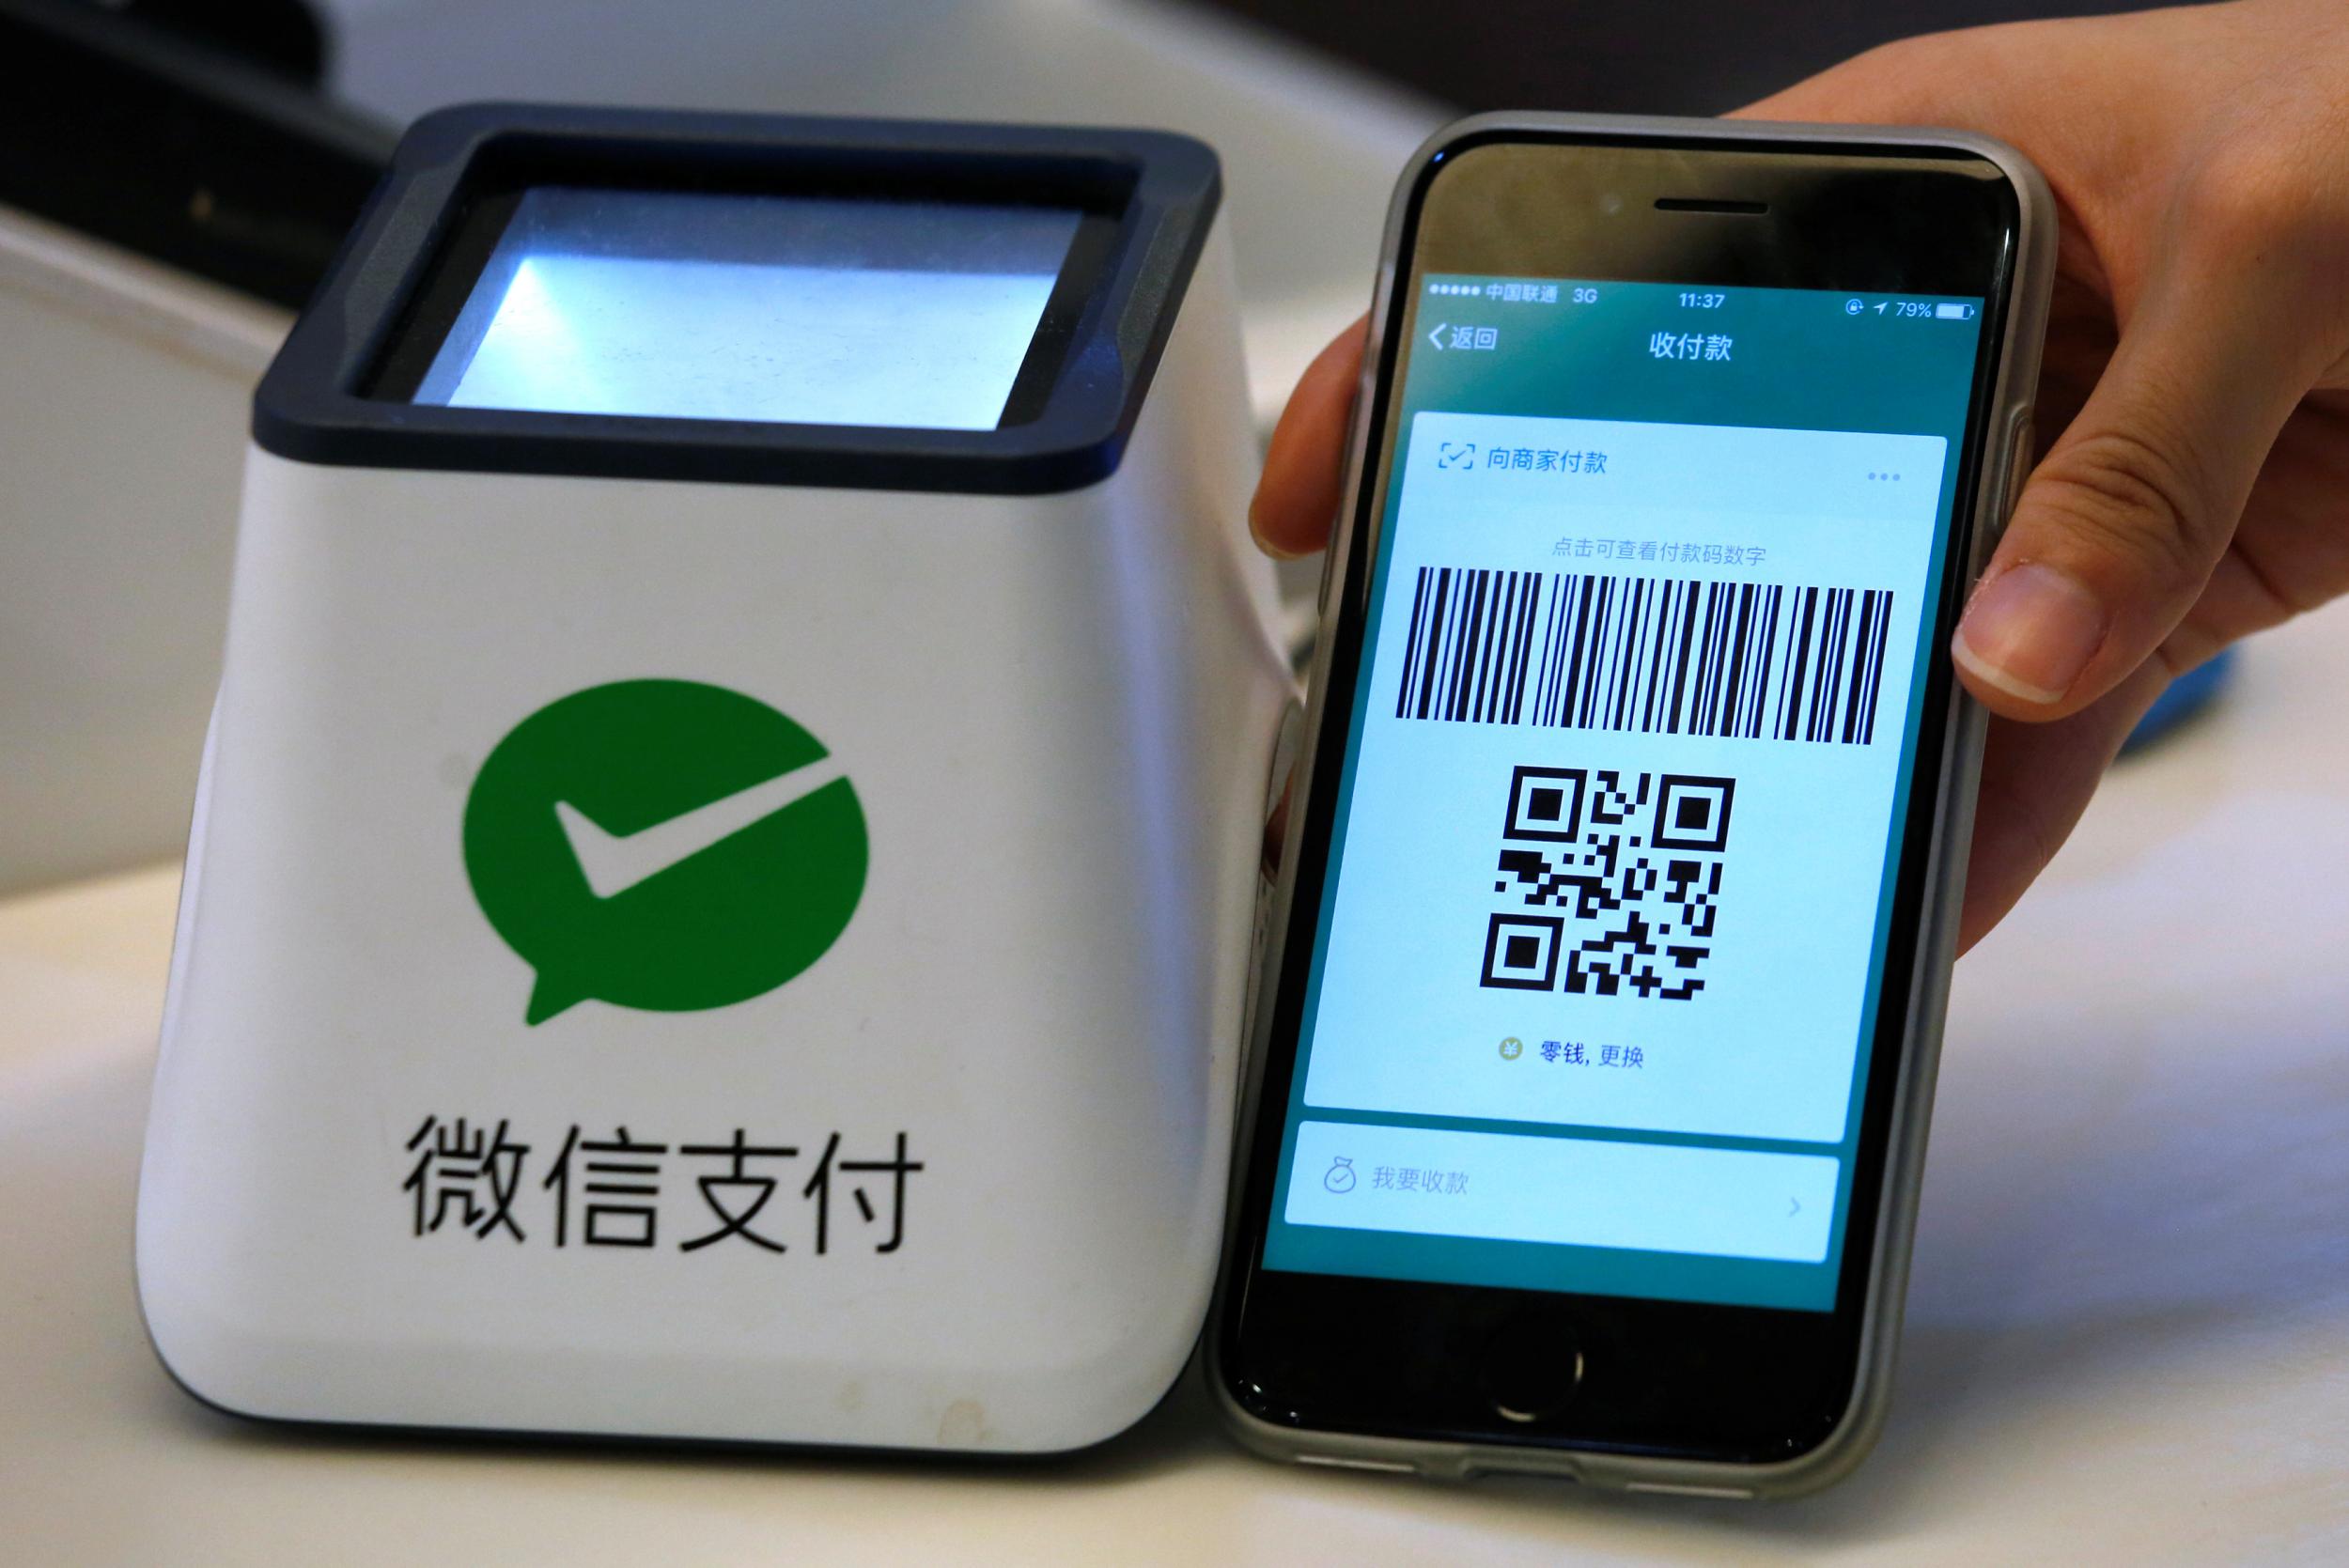 Tencent's WeChat Pay dominates China's digital payment market